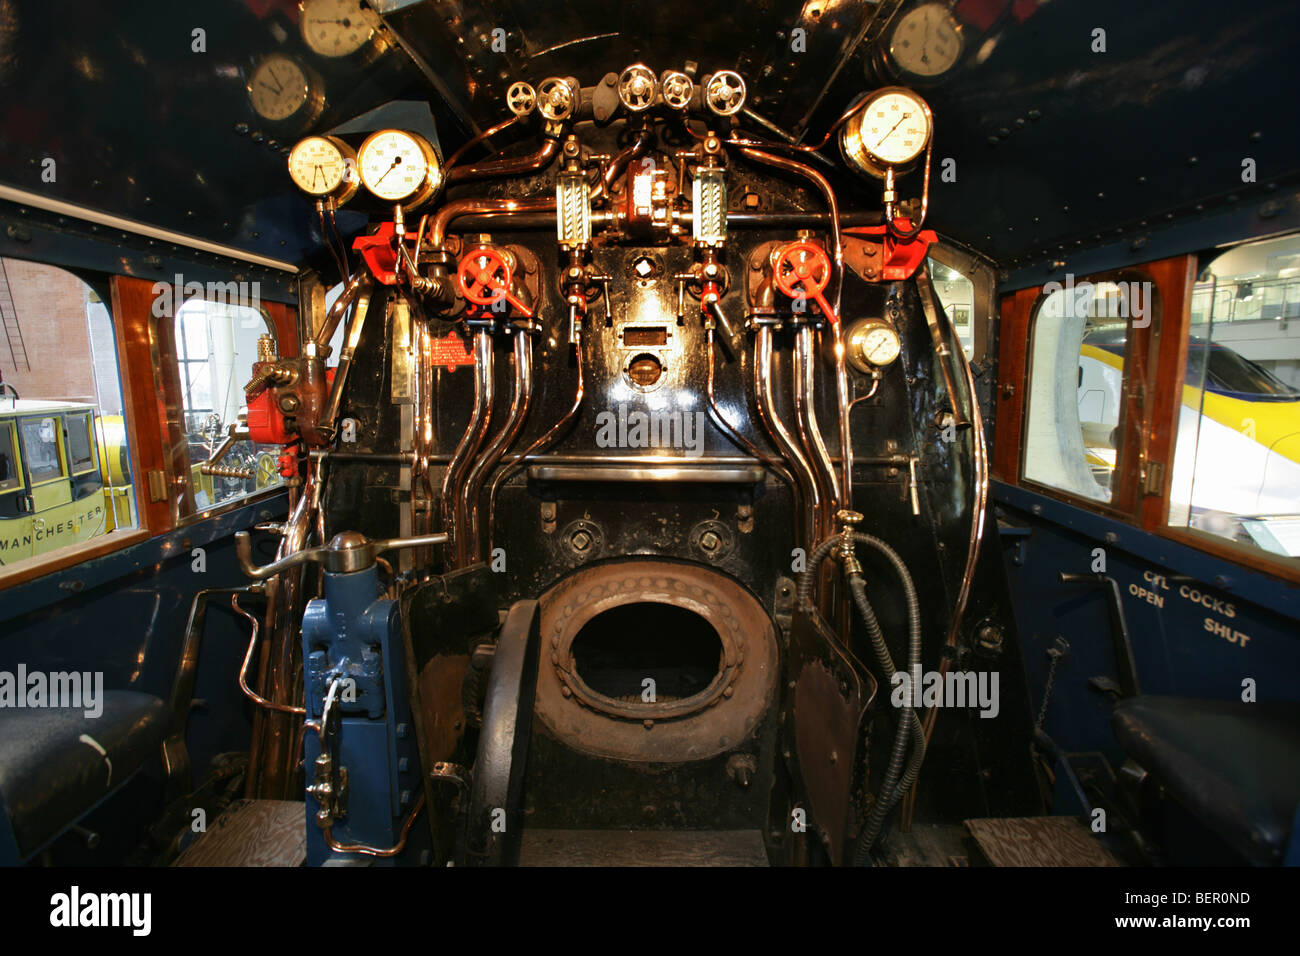 The Mallard locomotive engine footplate, firebox and controls at the National Railway Museum’s Great Hall. Stock Photo